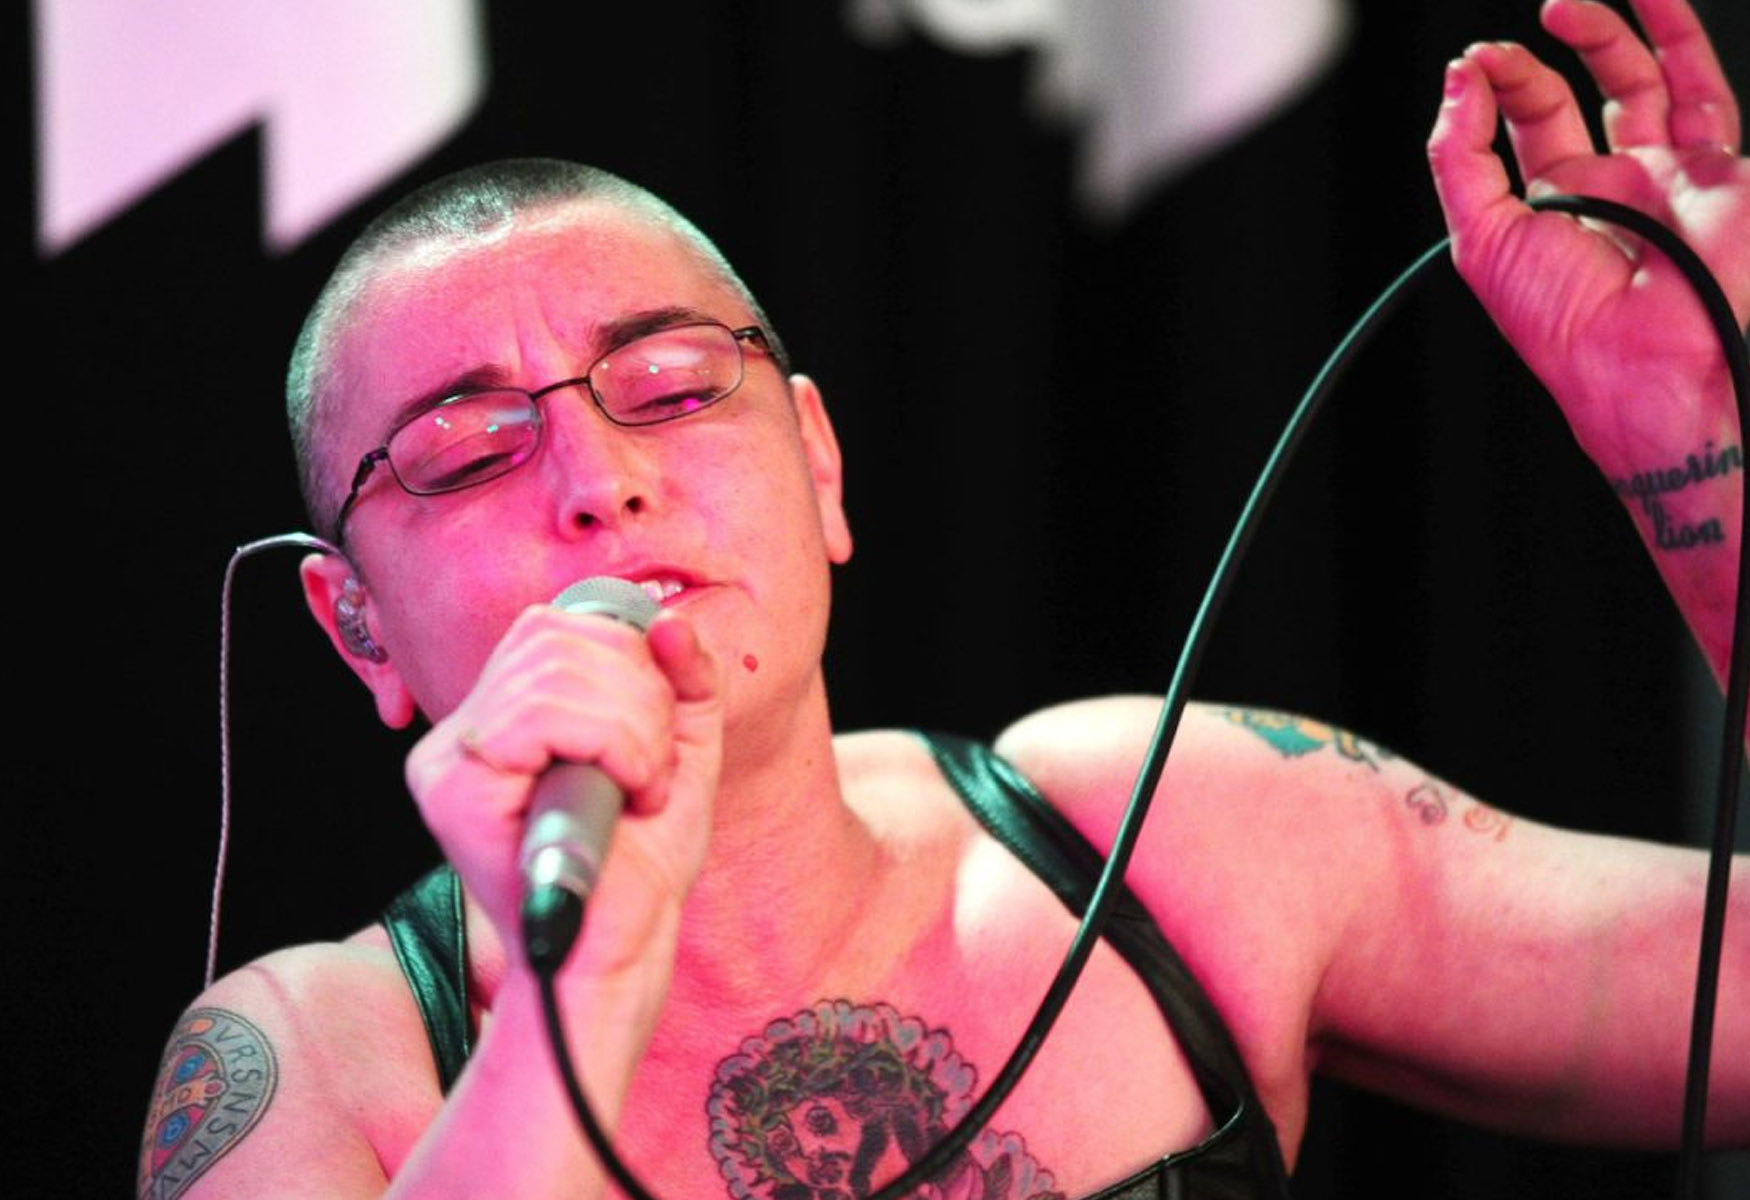 Sinéad O’Connor’s Cause Of Death Revealed As Natural Causes